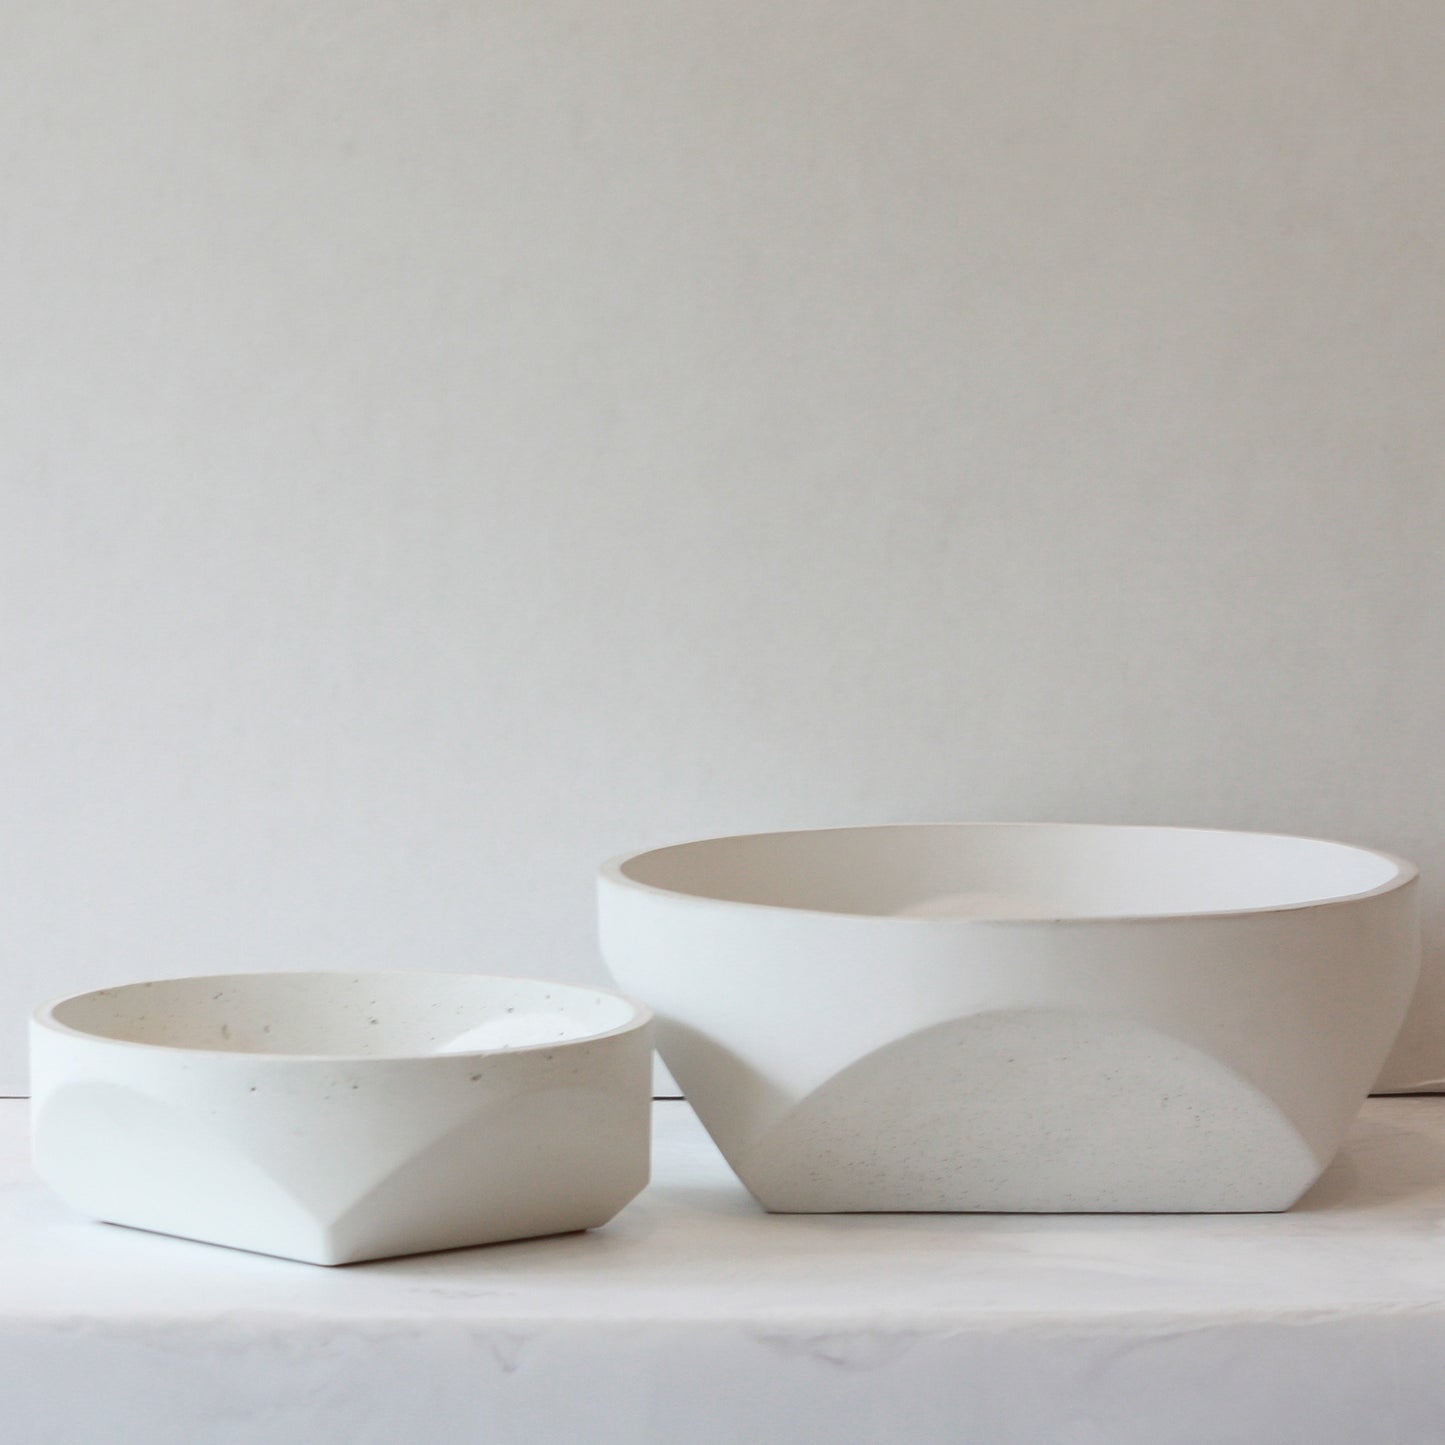 Concrete Bowl - White in small and large